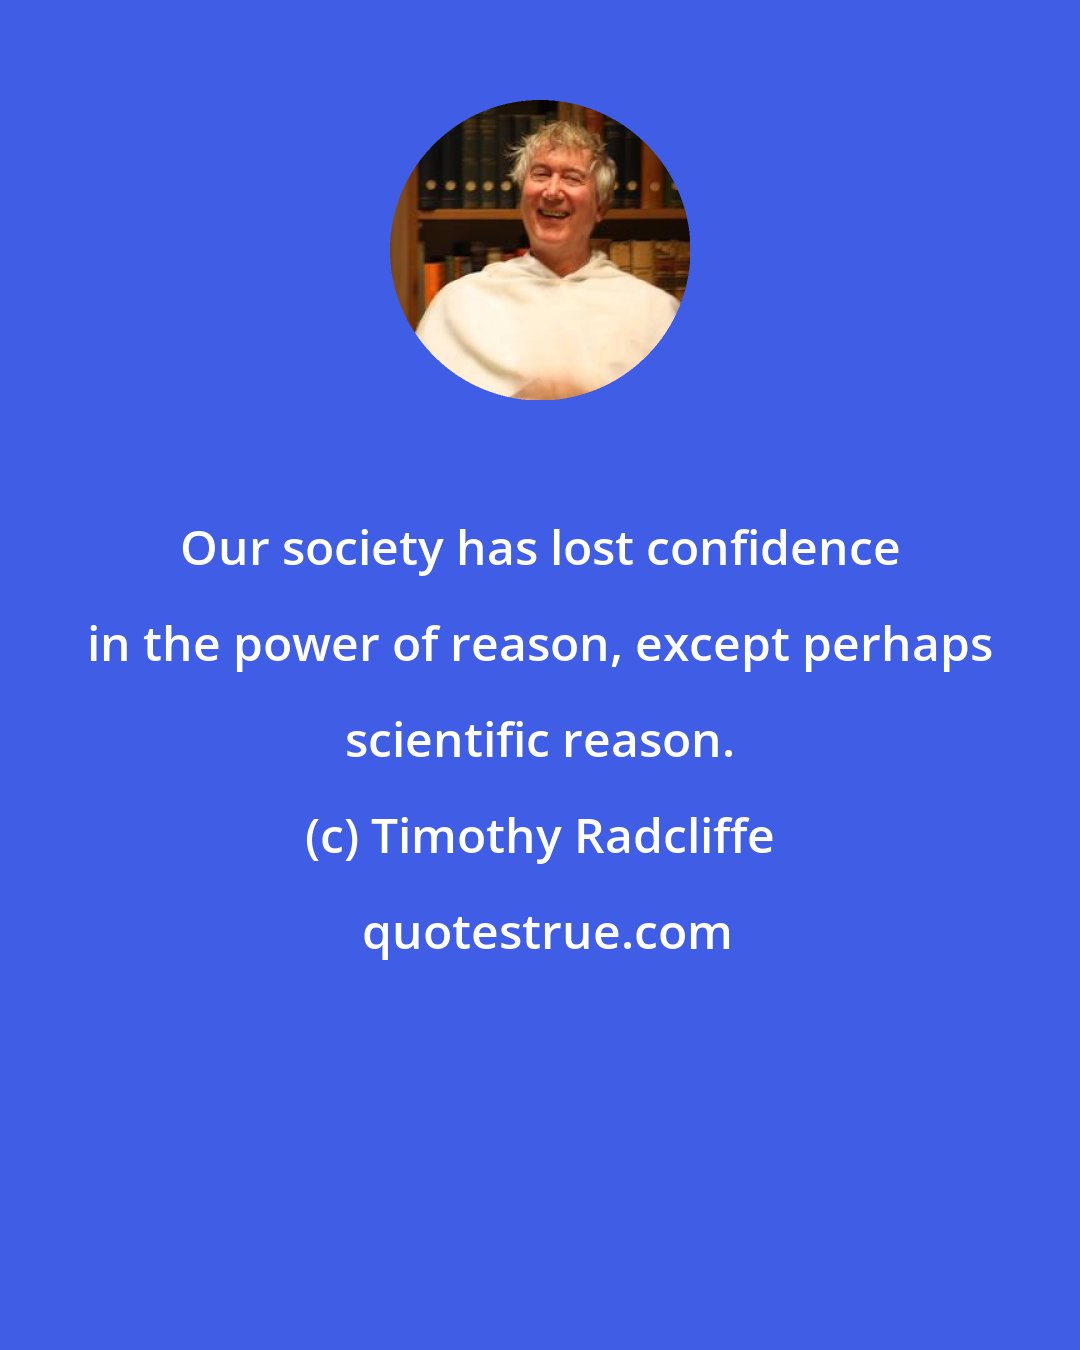 Timothy Radcliffe: Our society has lost confidence in the power of reason, except perhaps scientific reason.